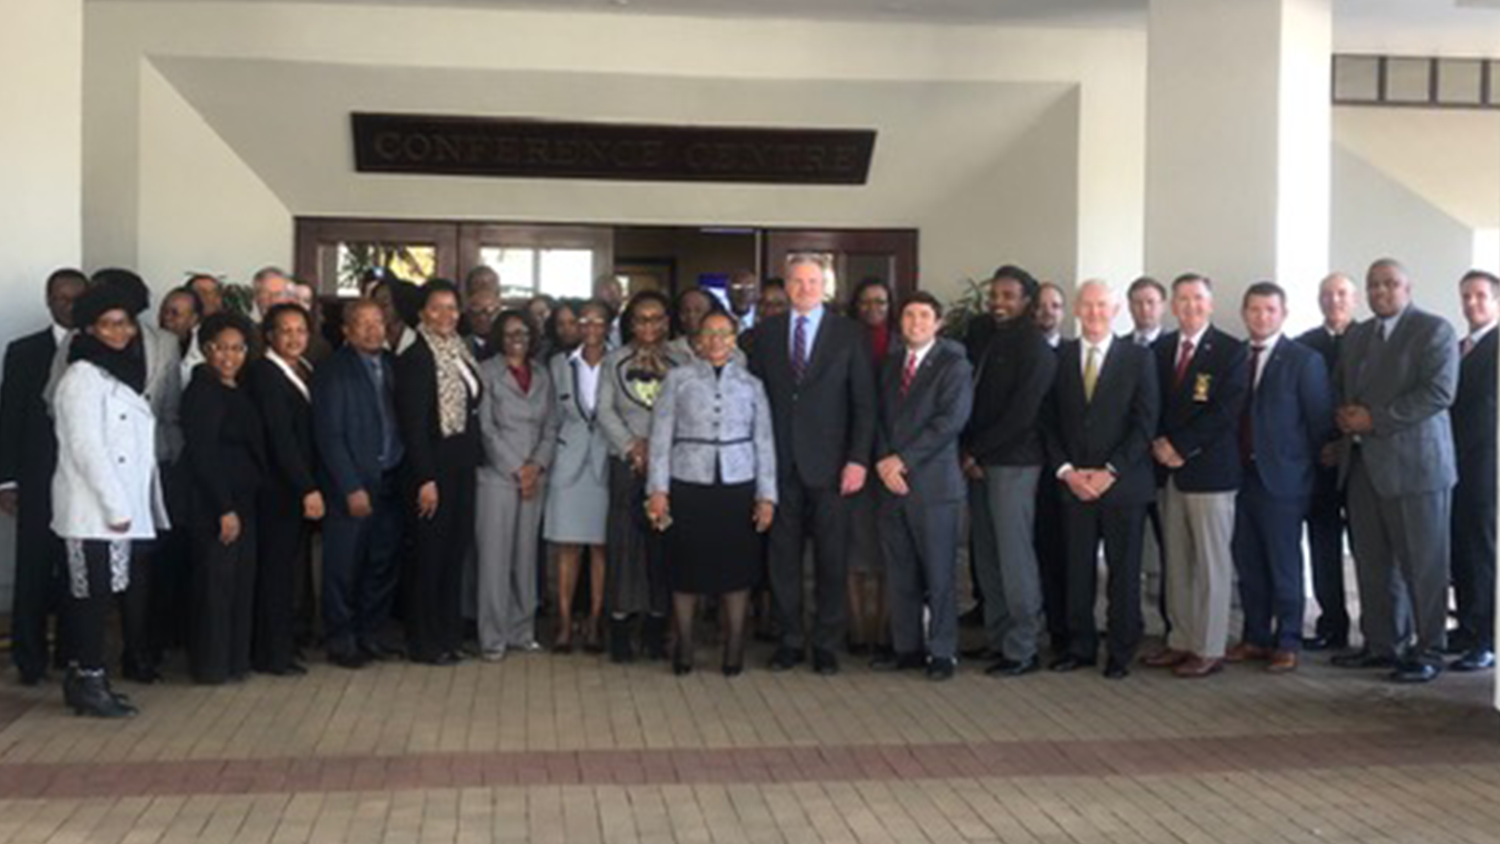 College of Education Associate Professor poses with others in Botswana